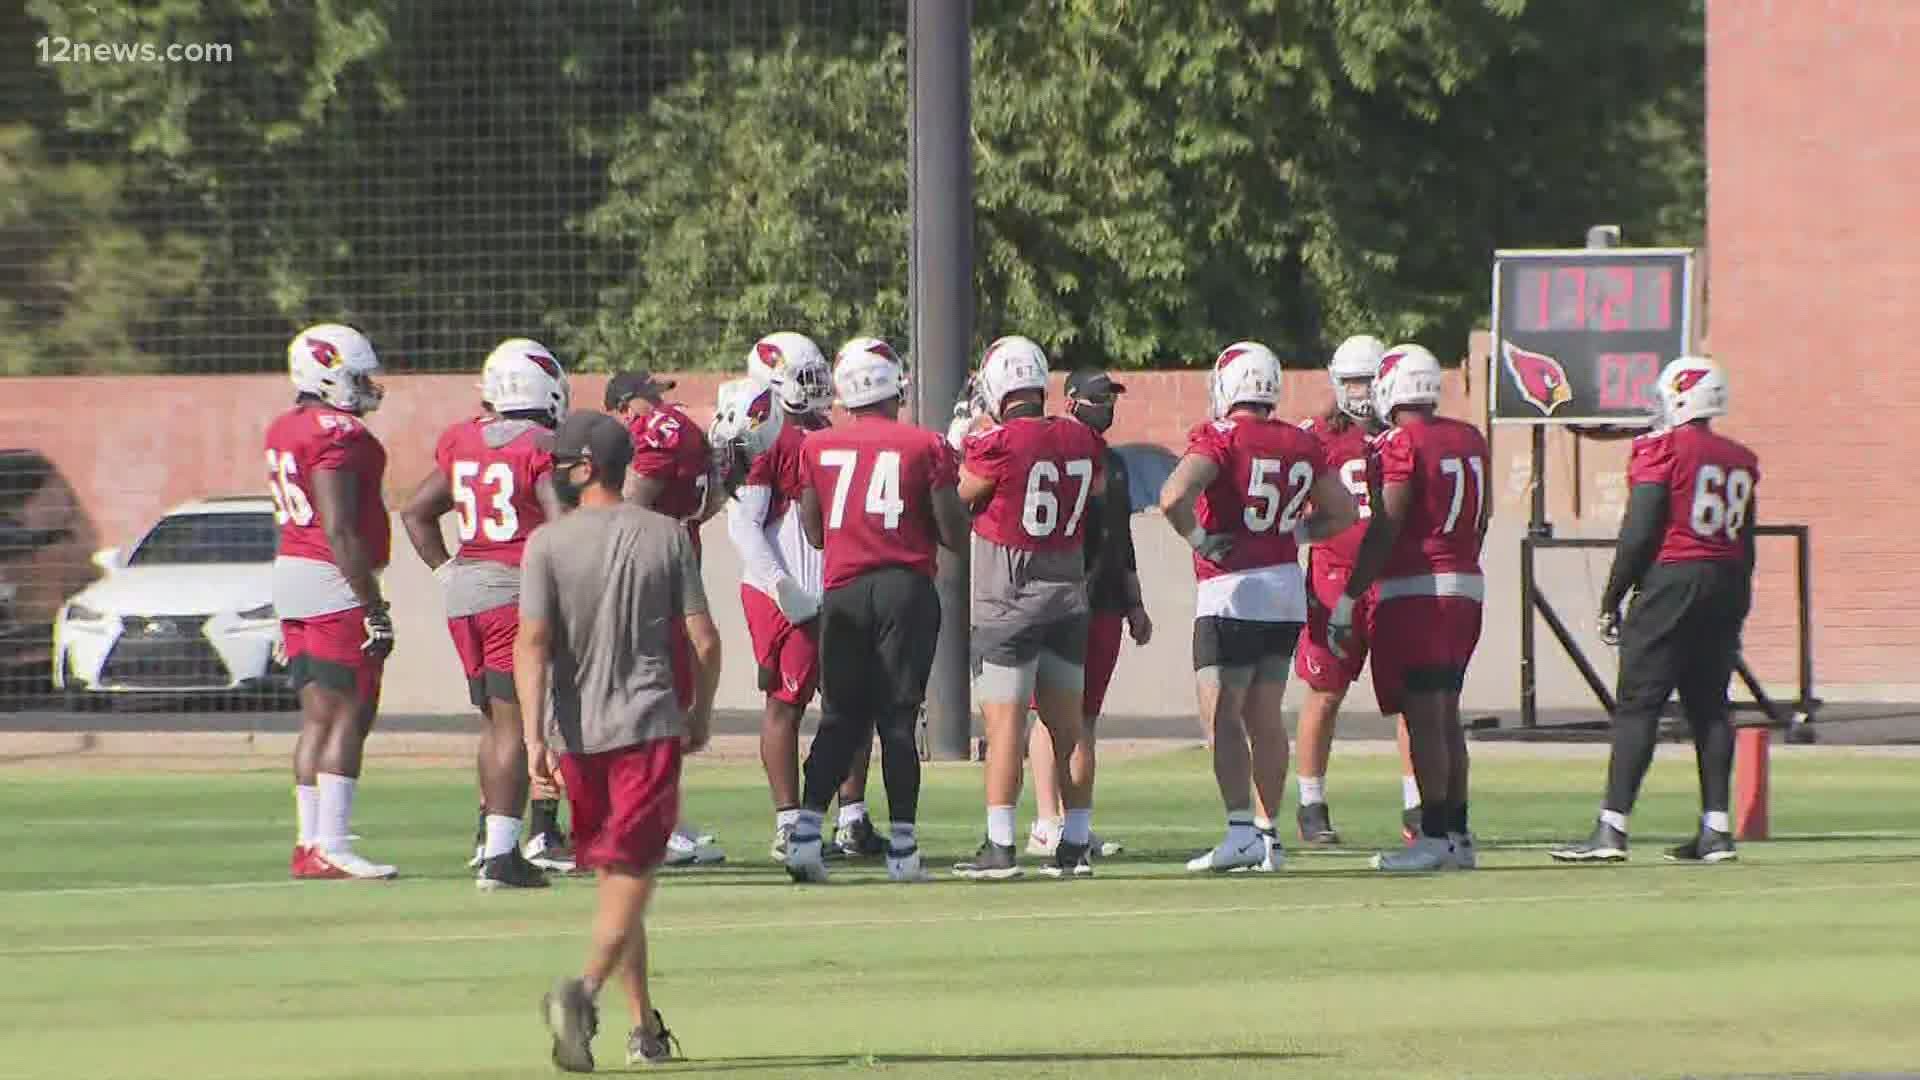 The two Arizona Cardinals players who tested positive for COVID-19 were starting cornerback Byron Murphy and linebacker Devon Kennard.